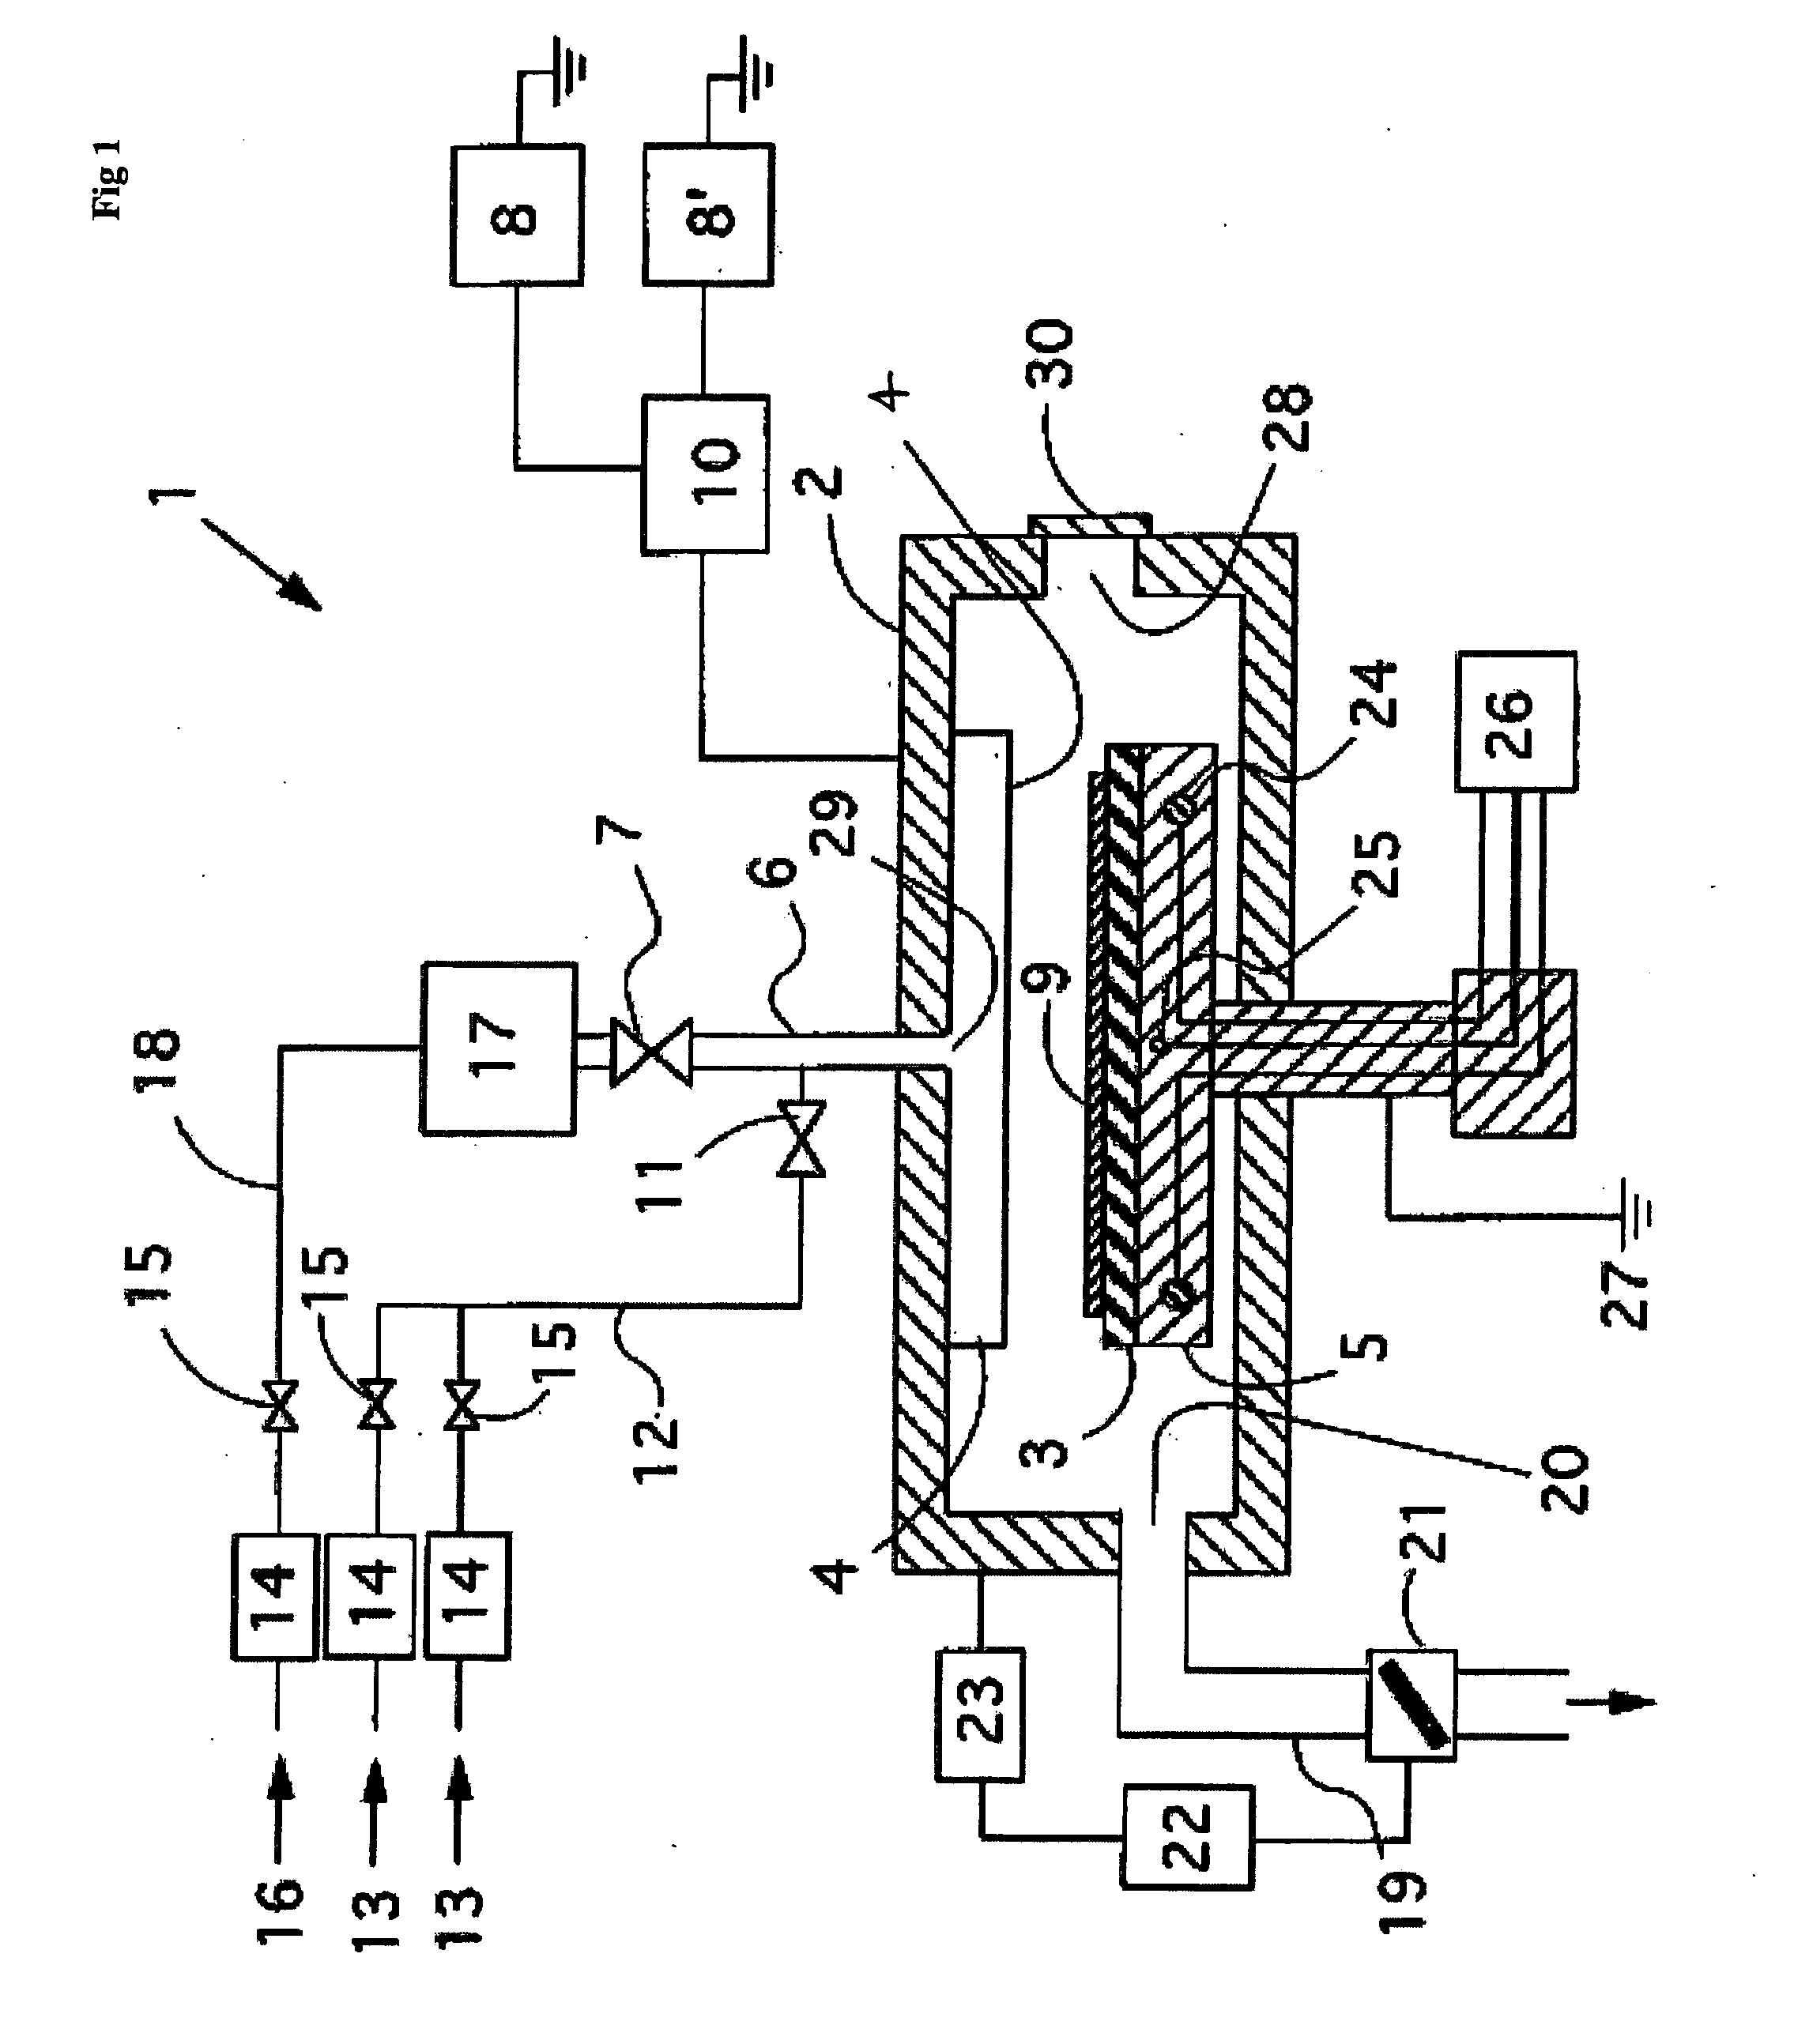 Method of forming silicon carbide films